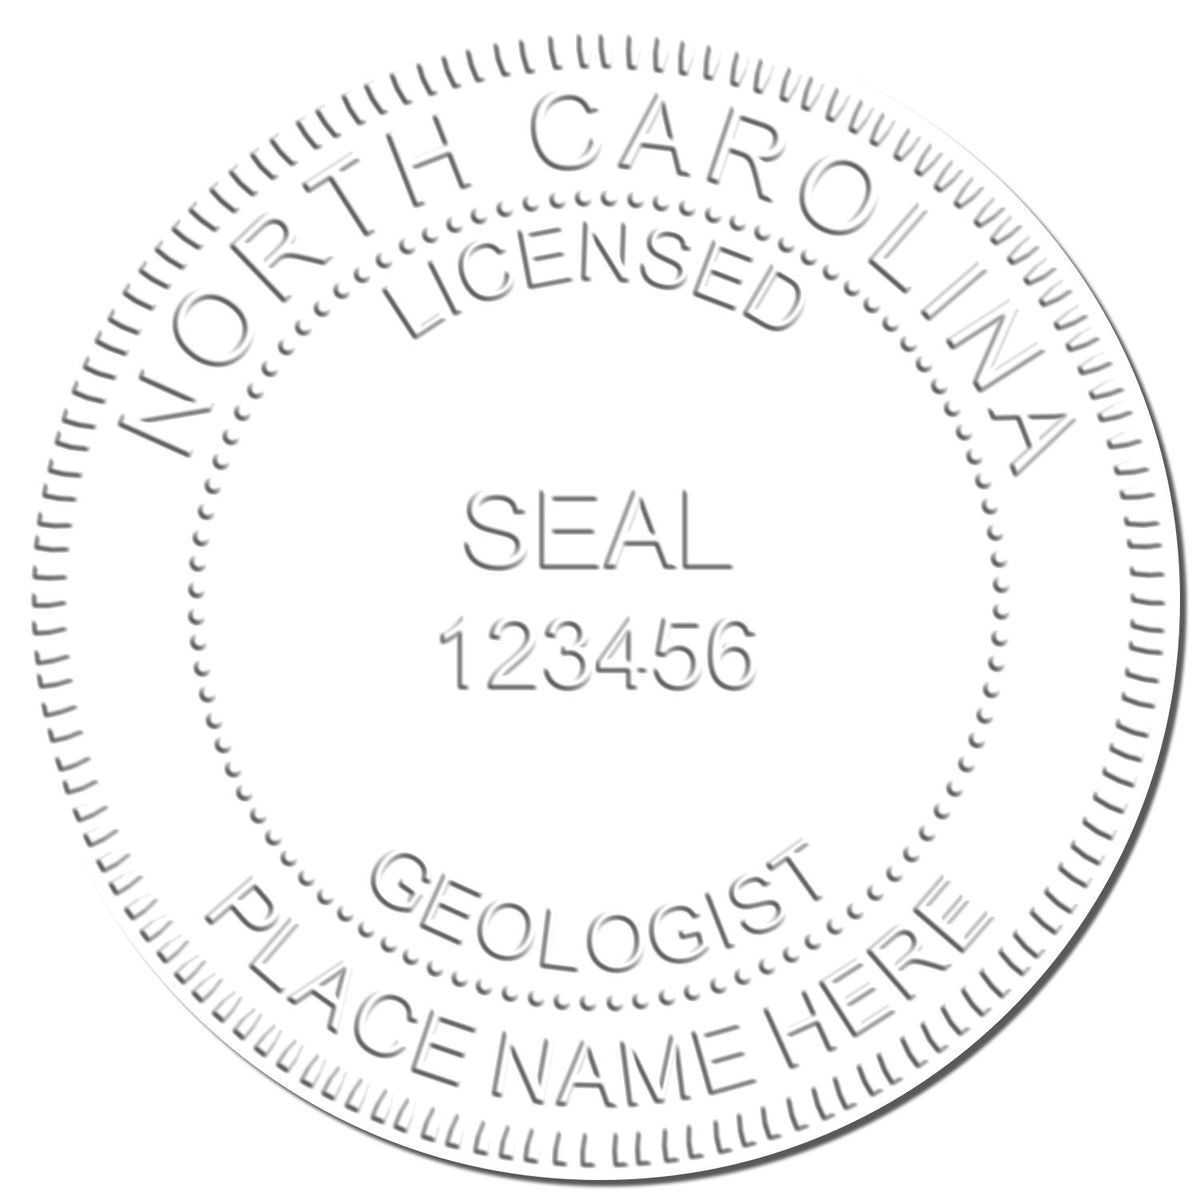 The North Carolina Geologist Desk Seal stamp impression comes to life with a crisp, detailed image stamped on paper - showcasing true professional quality.